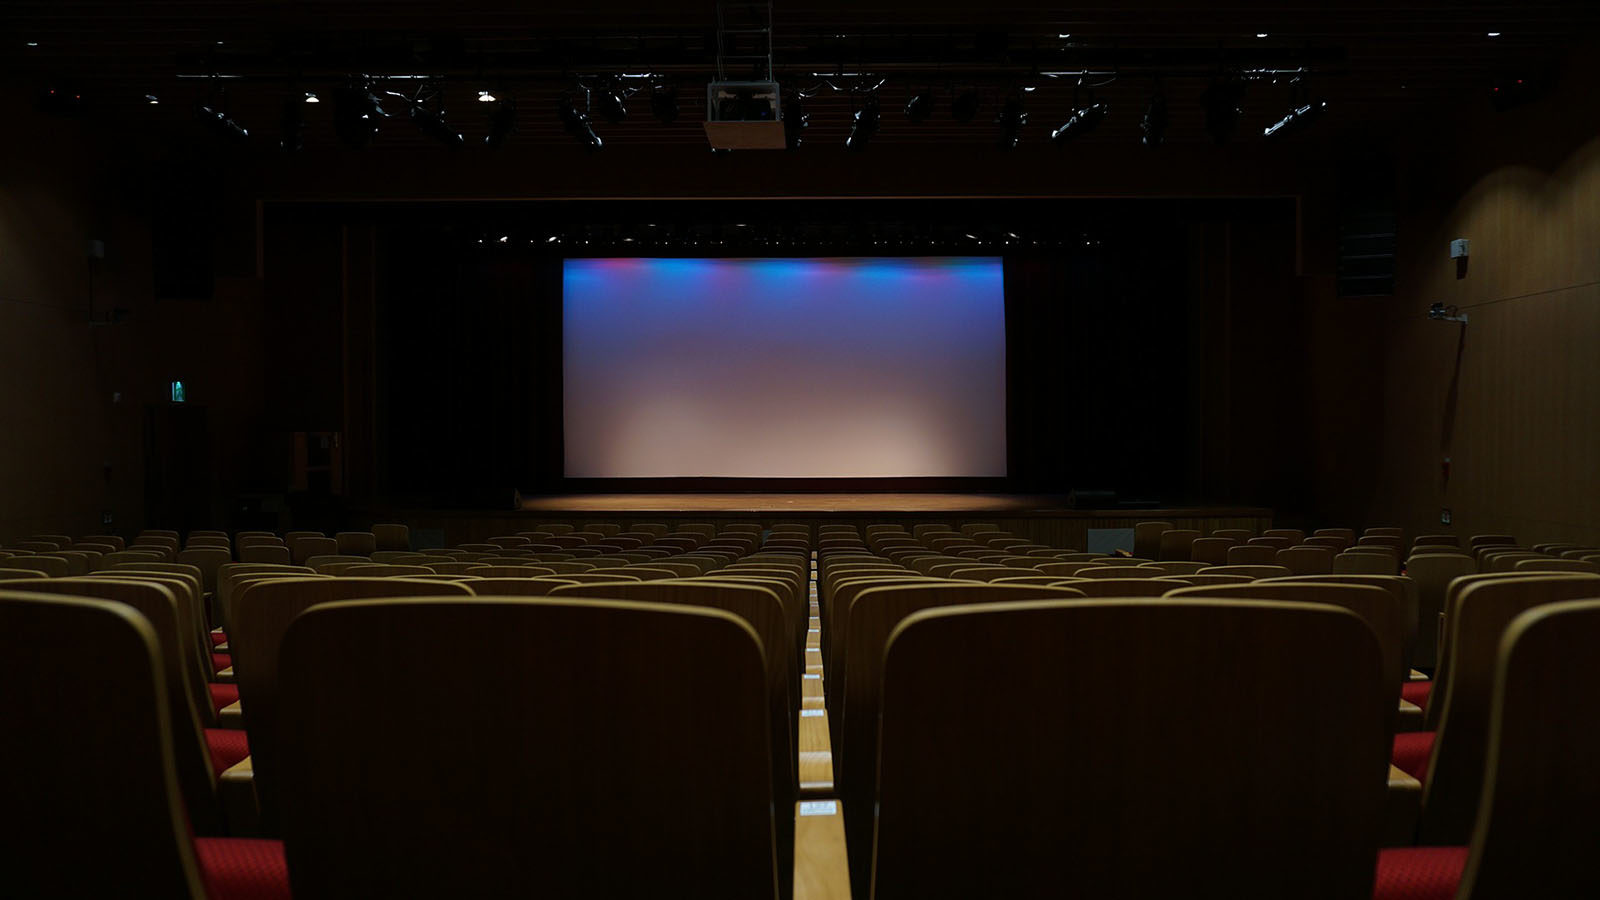 Cinemas, theaters, performing arts venues and and libraries